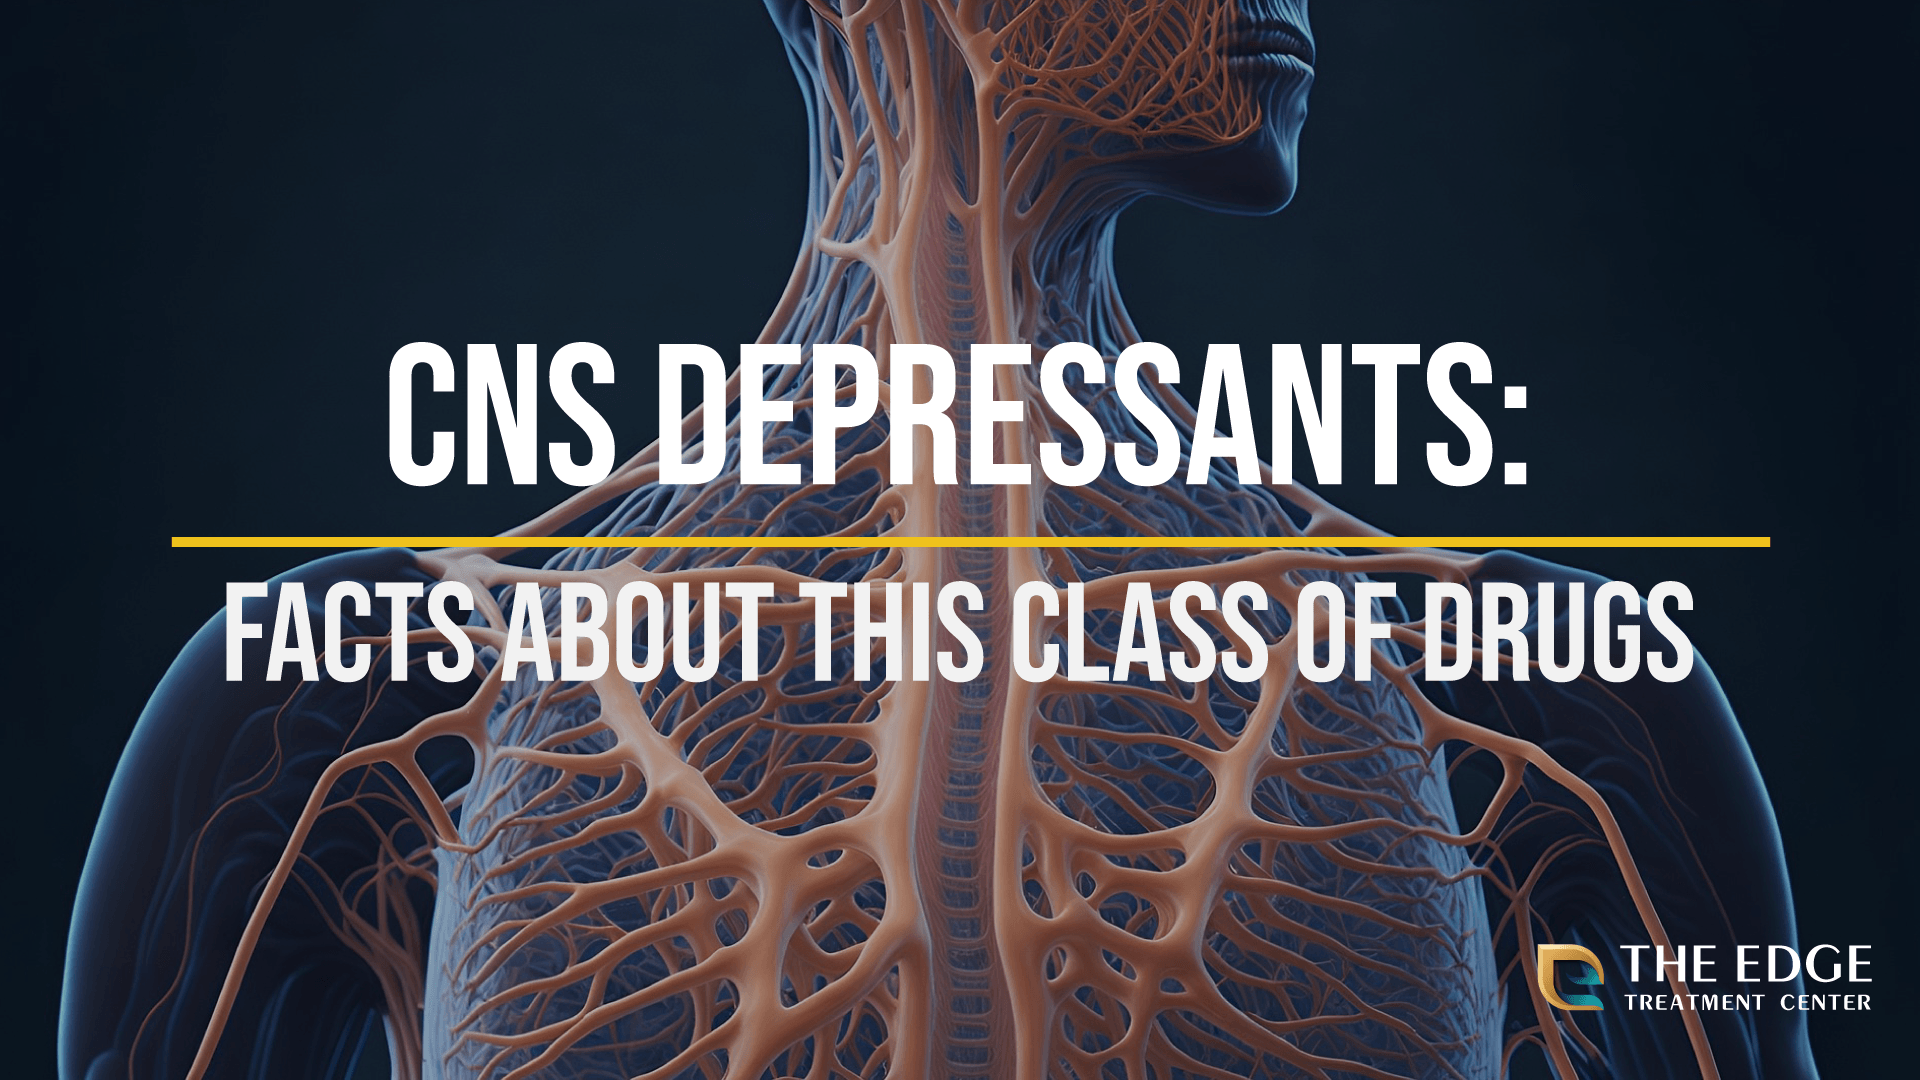 What are CNS Depressants?